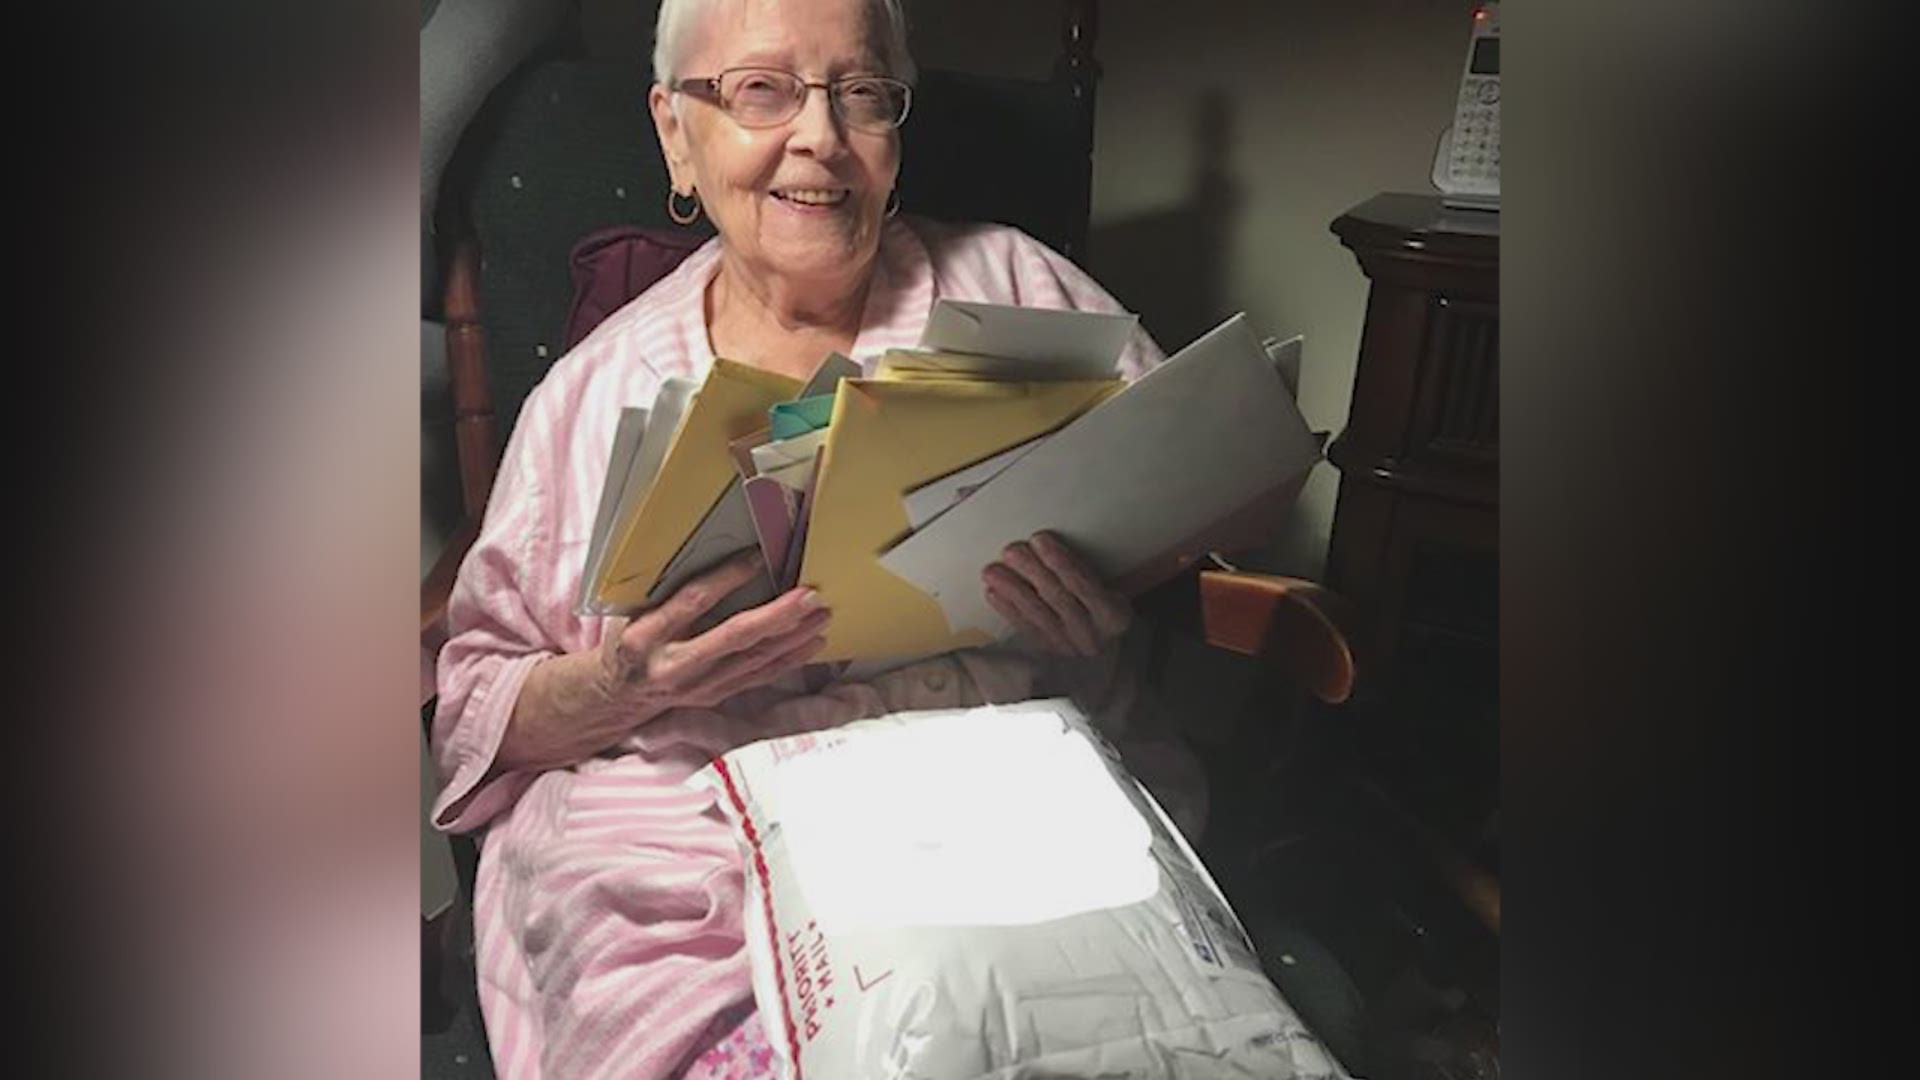 Belmont woman wants 95 birthday cards to celebrate her 95th birthday